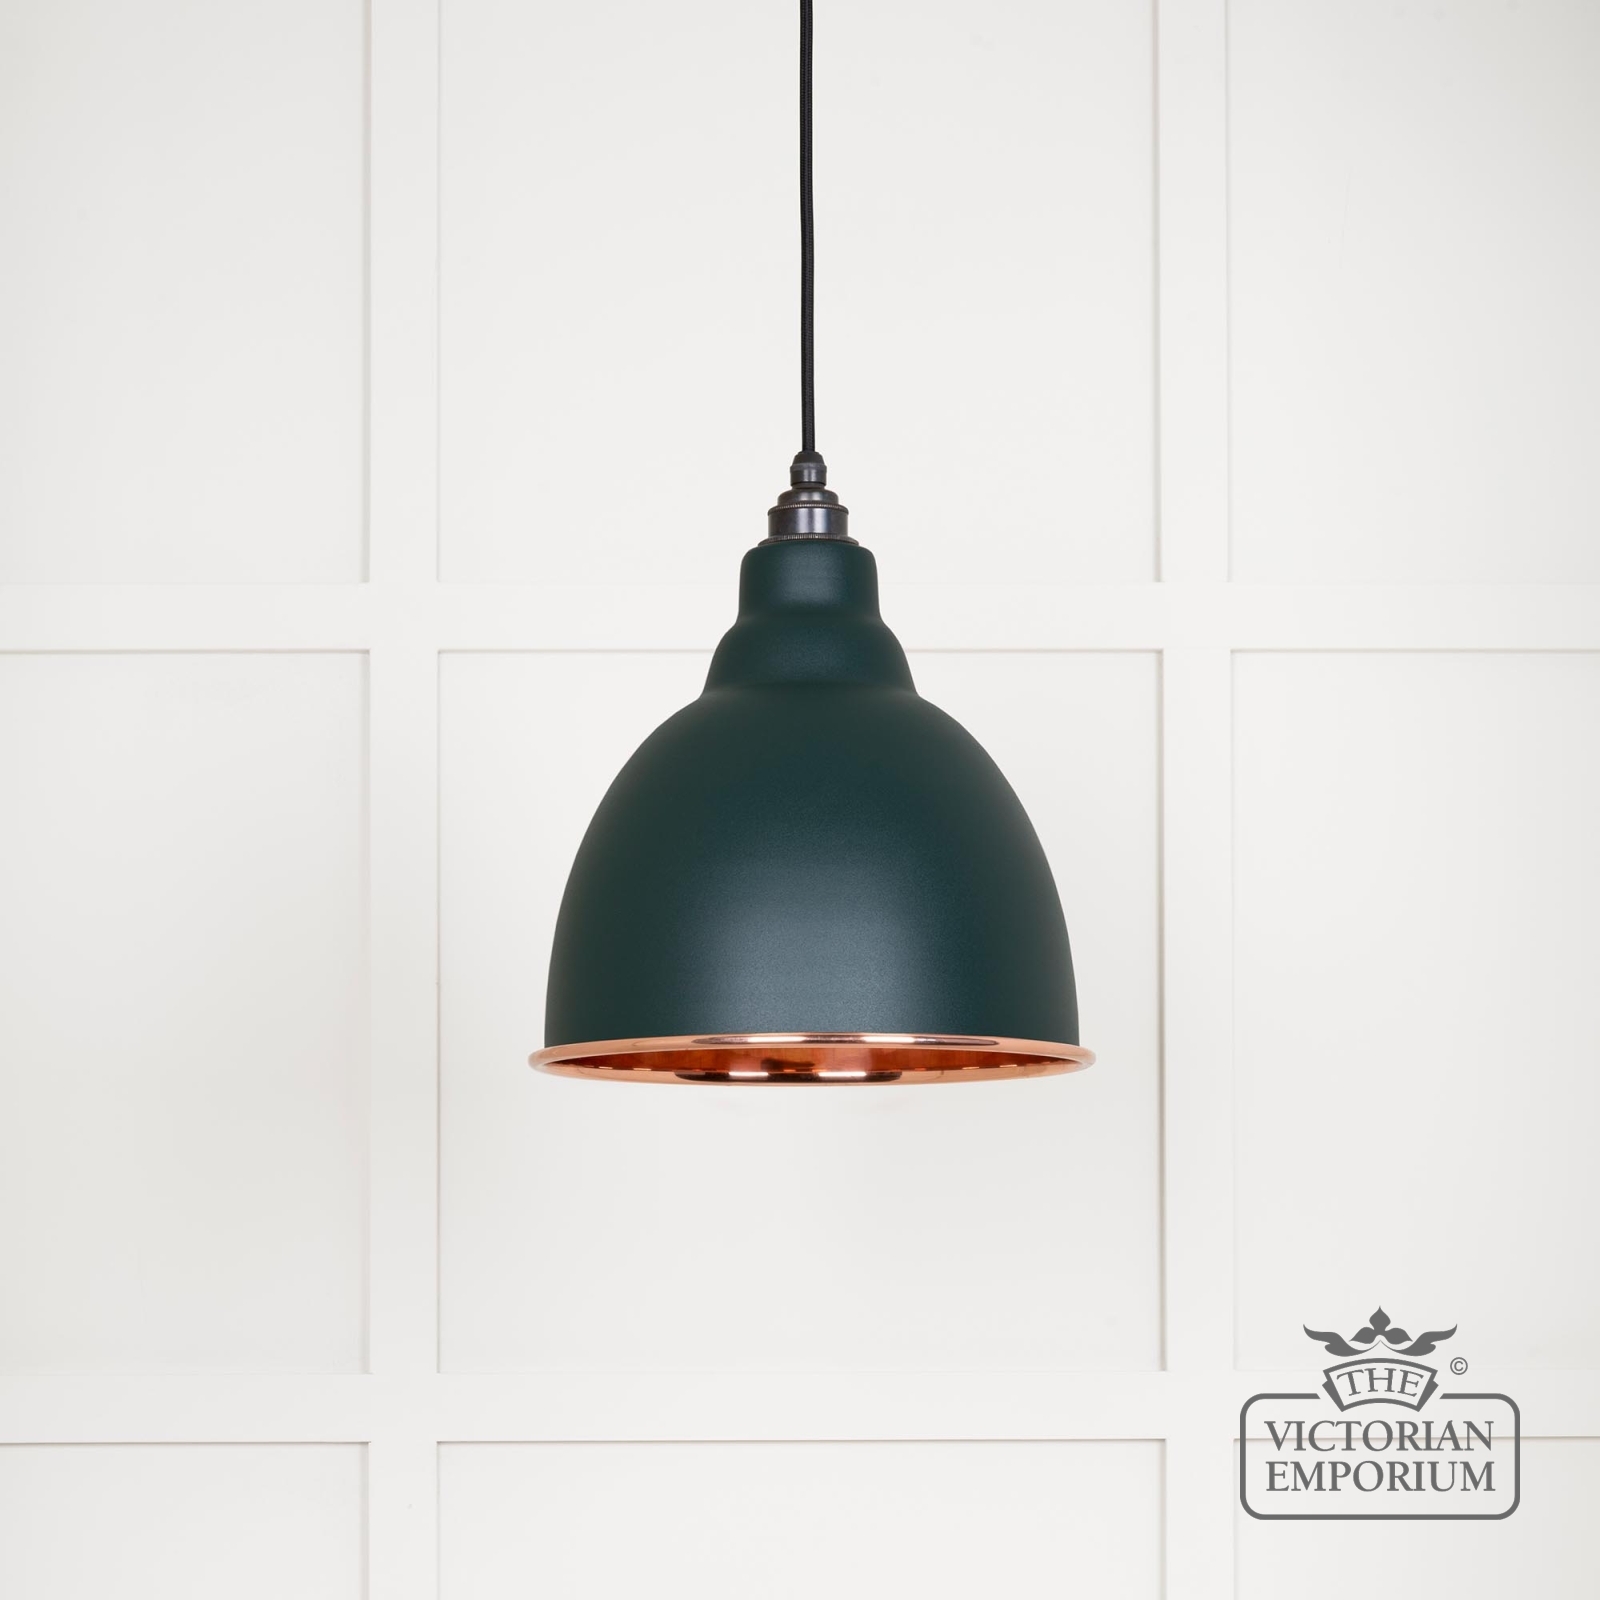 Brindle Pendant Light in Smooth Copper with Dingle Exterior